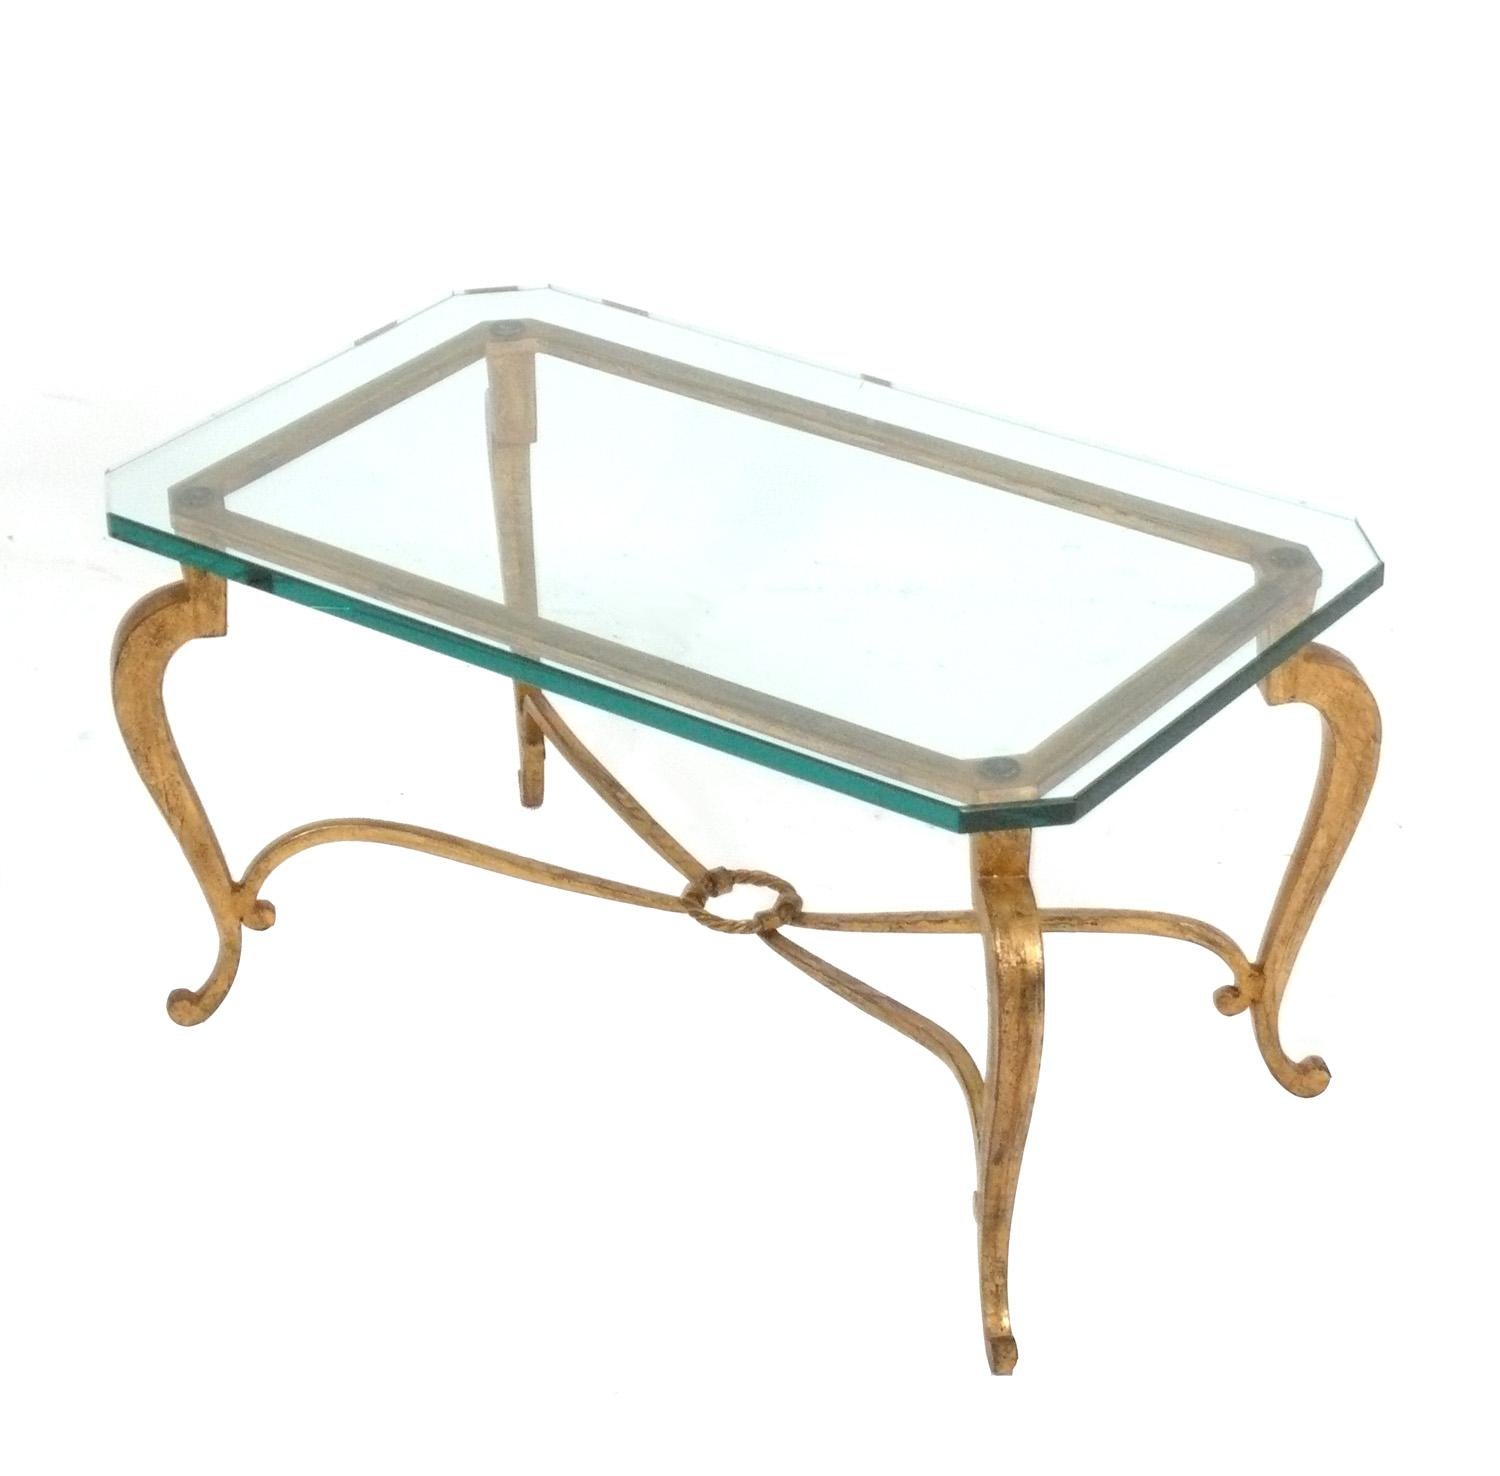 Elegant French Gilt Iron Coffee Table, in the style of Maison Bagues, unsigned, French, circa 1950s. 